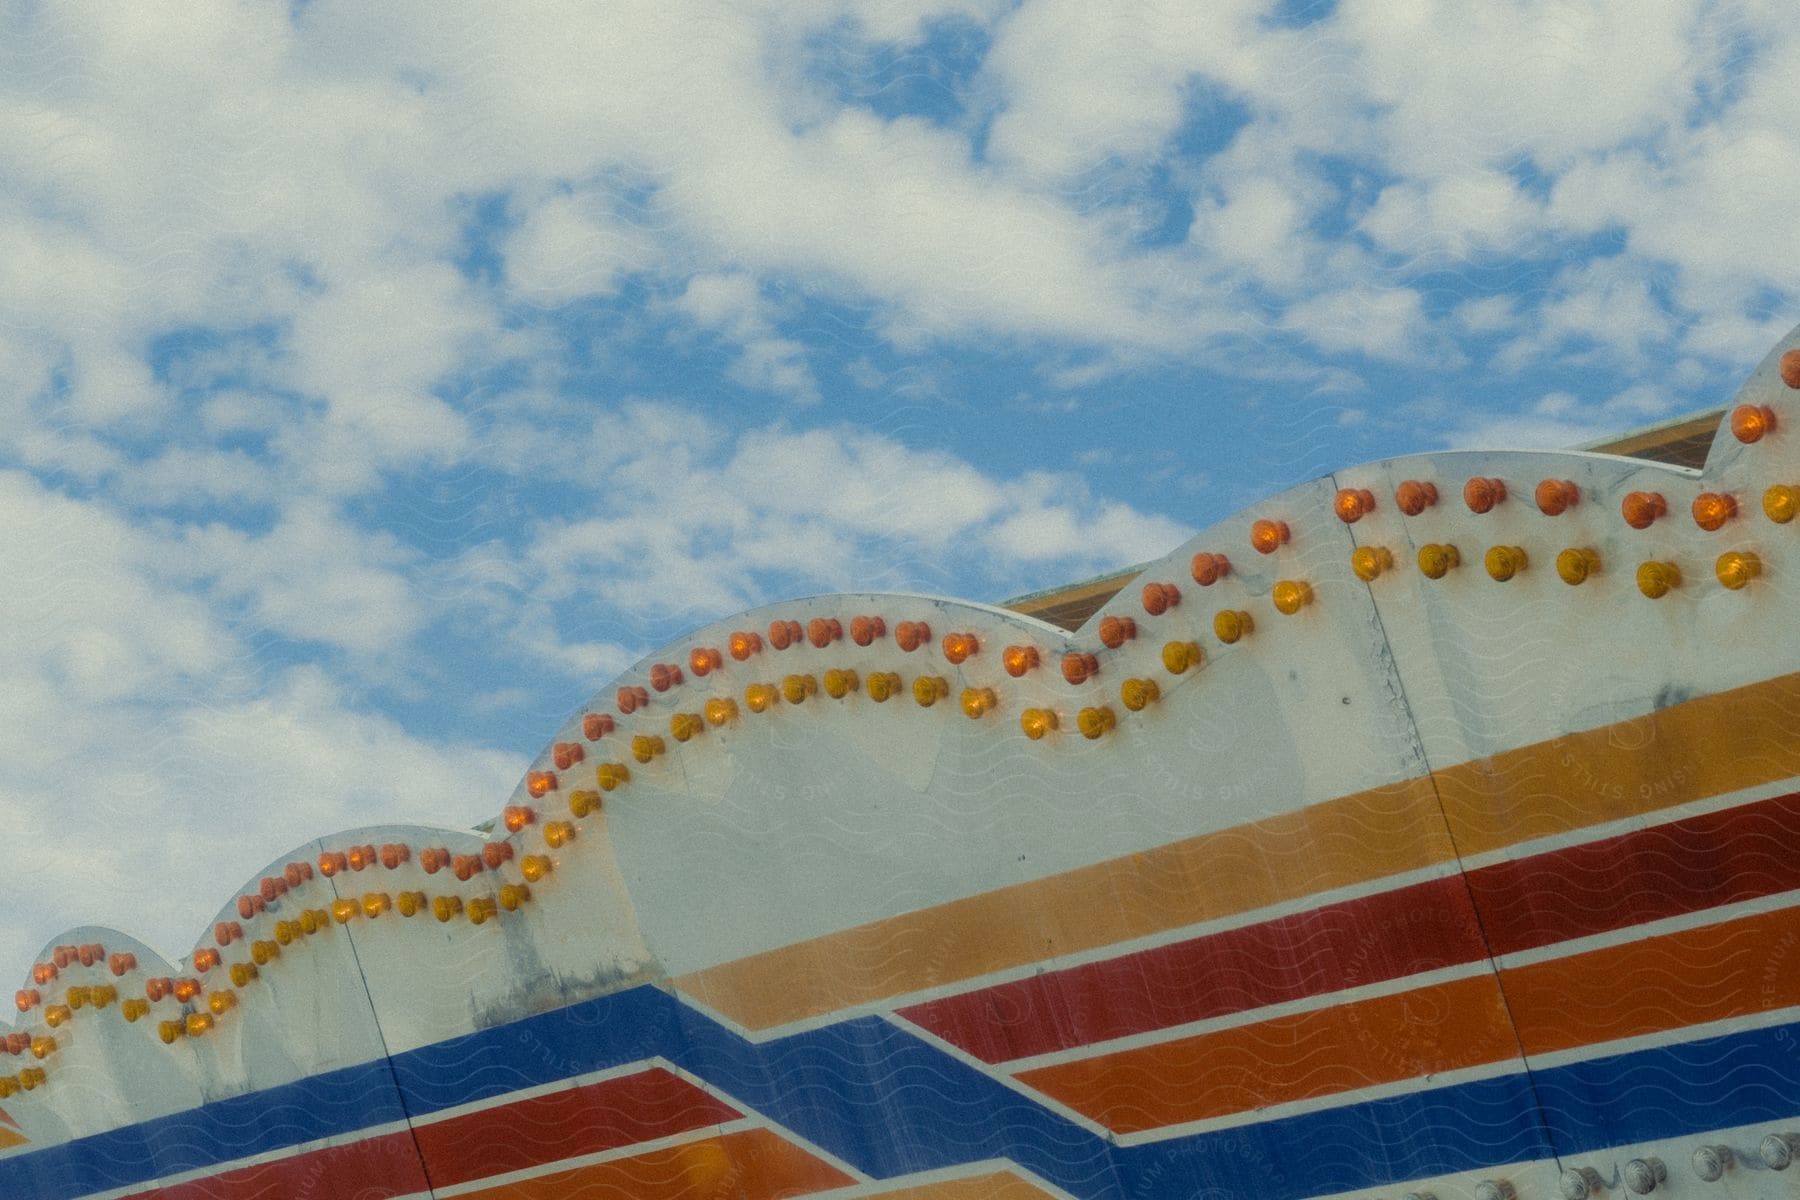 Close-up on the exterior architecture of a metal amusement park ride and flashing lights during a blue sky day with clouds.